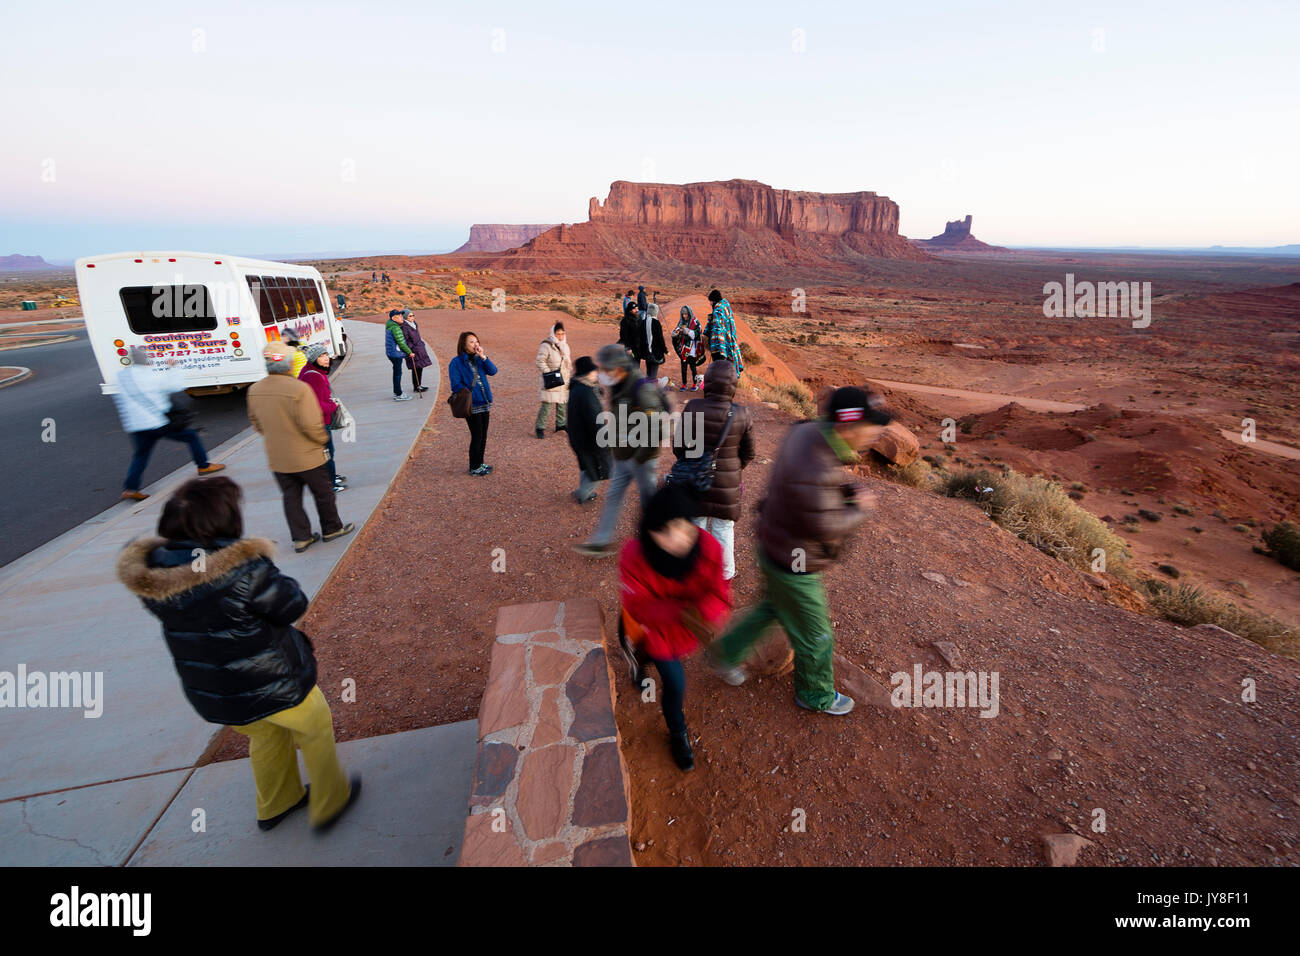 Monument Valley, Utah, USA. A group of Asian tourists walk at a viewpoint at Monument Valley near their tour bus during sunrise. Stock Photo